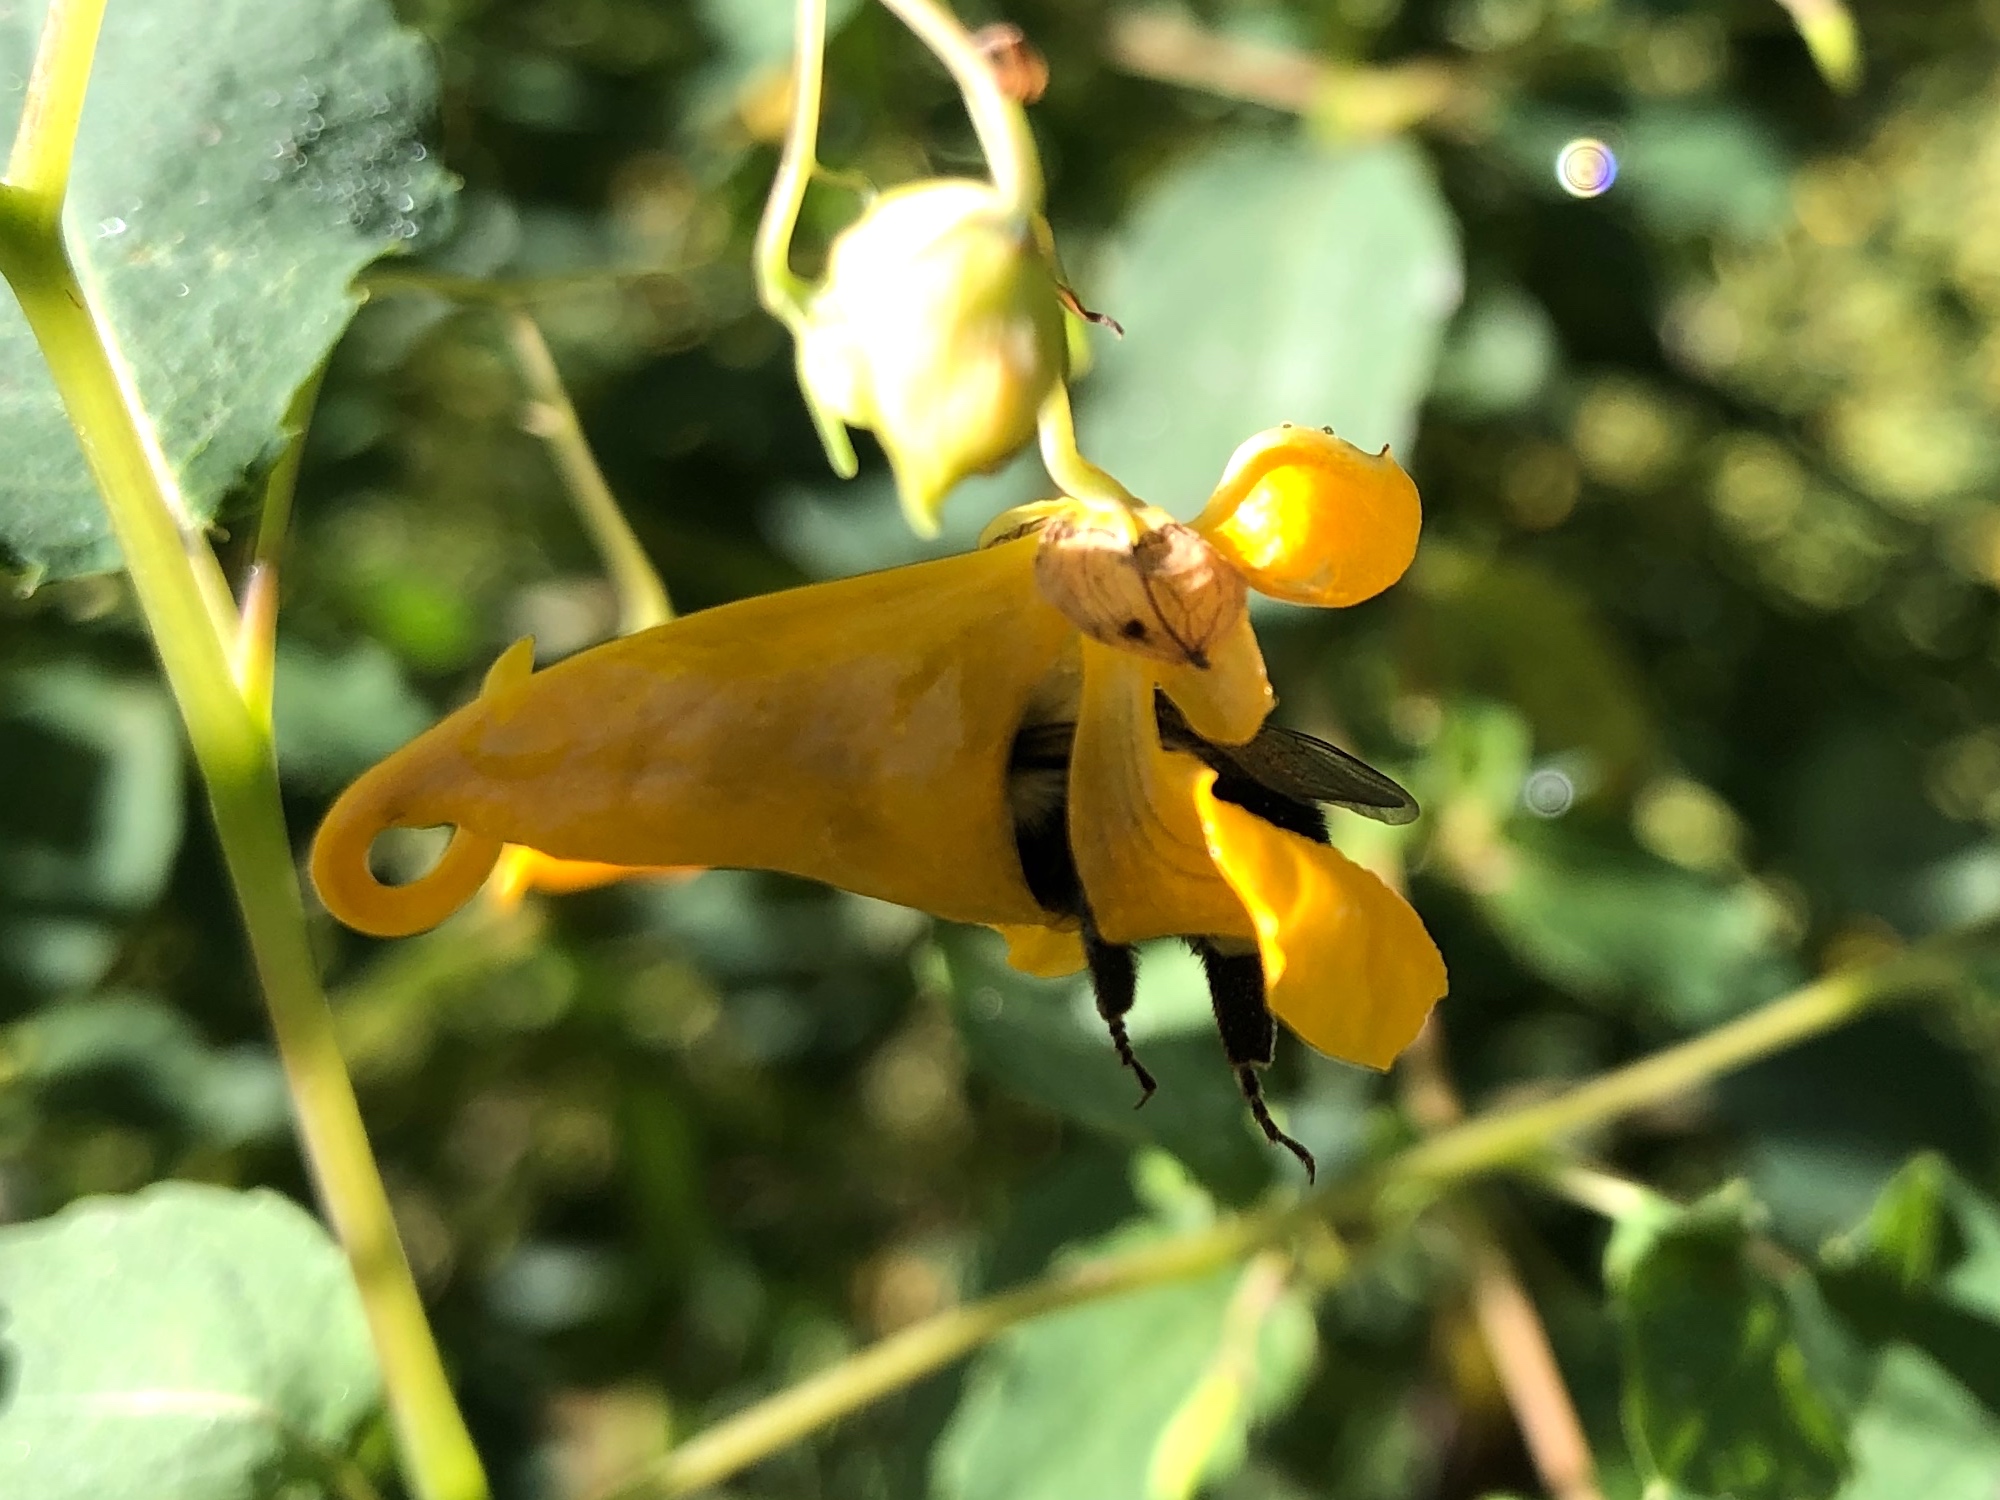 Bumblebee diving into Orange Jewelweed at Duck Pond on August 30, 2020.